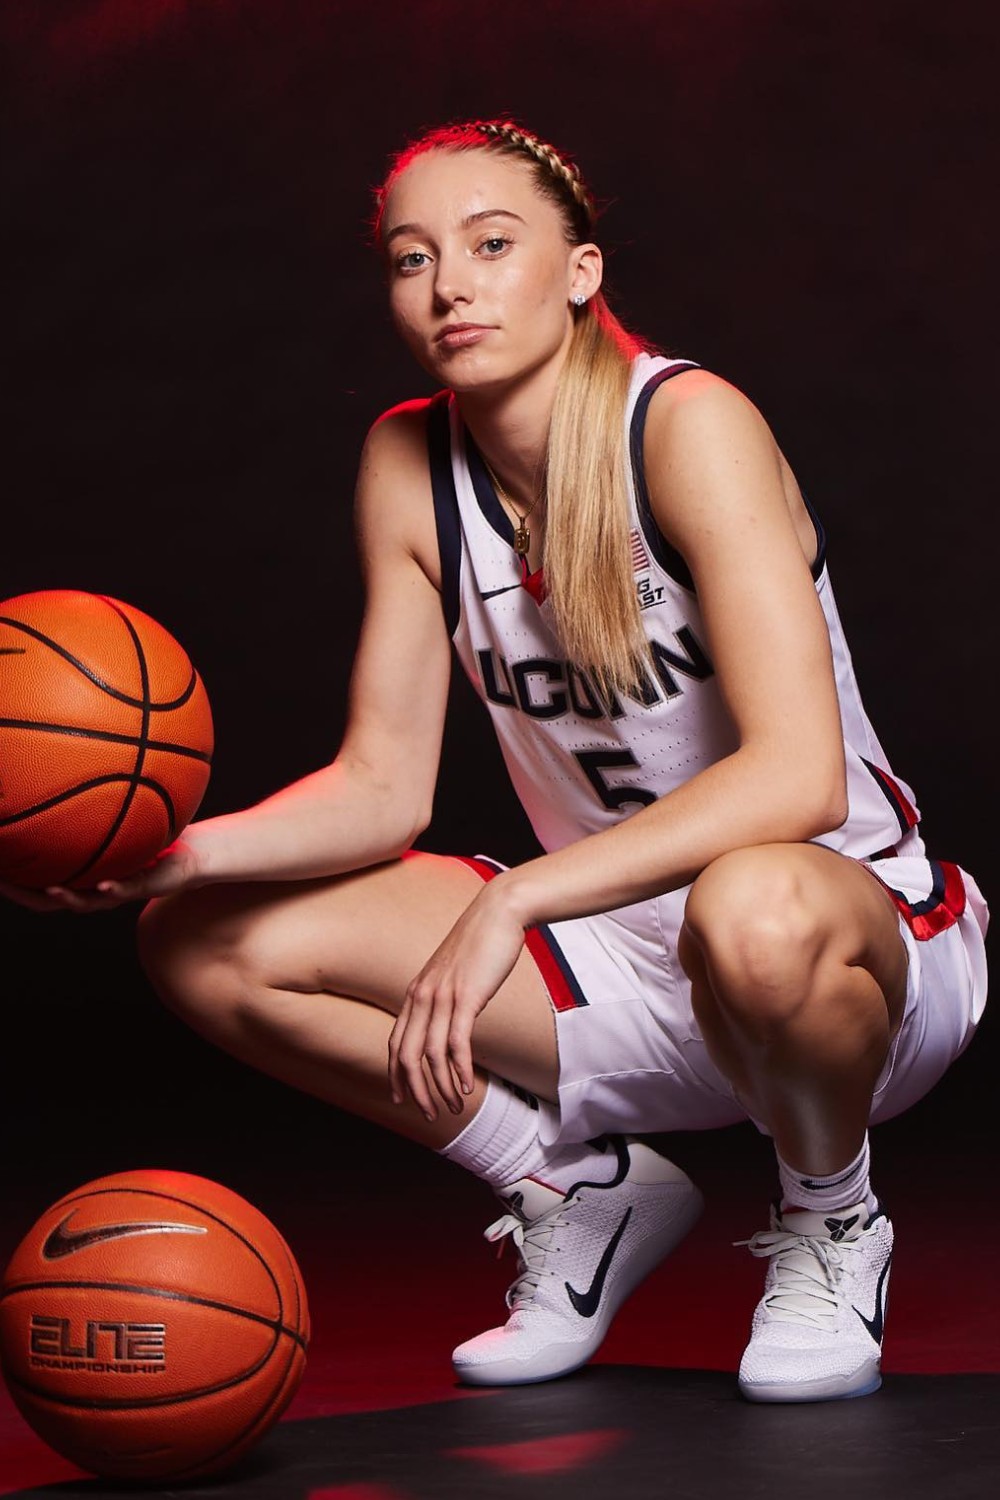 Paige Bueckers, A Standout Collegiate Basketball Player